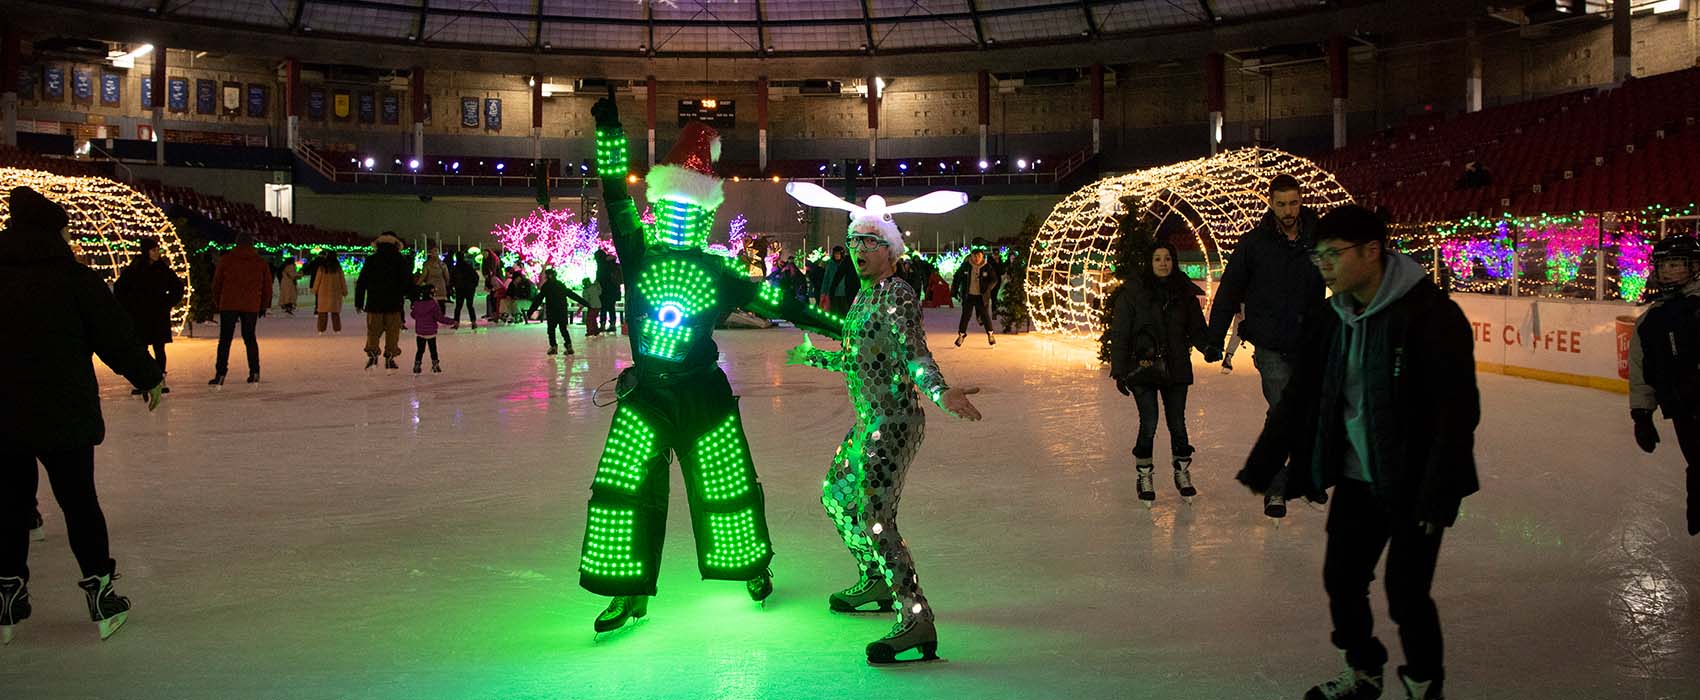 Two people in light-up costumes ice skating